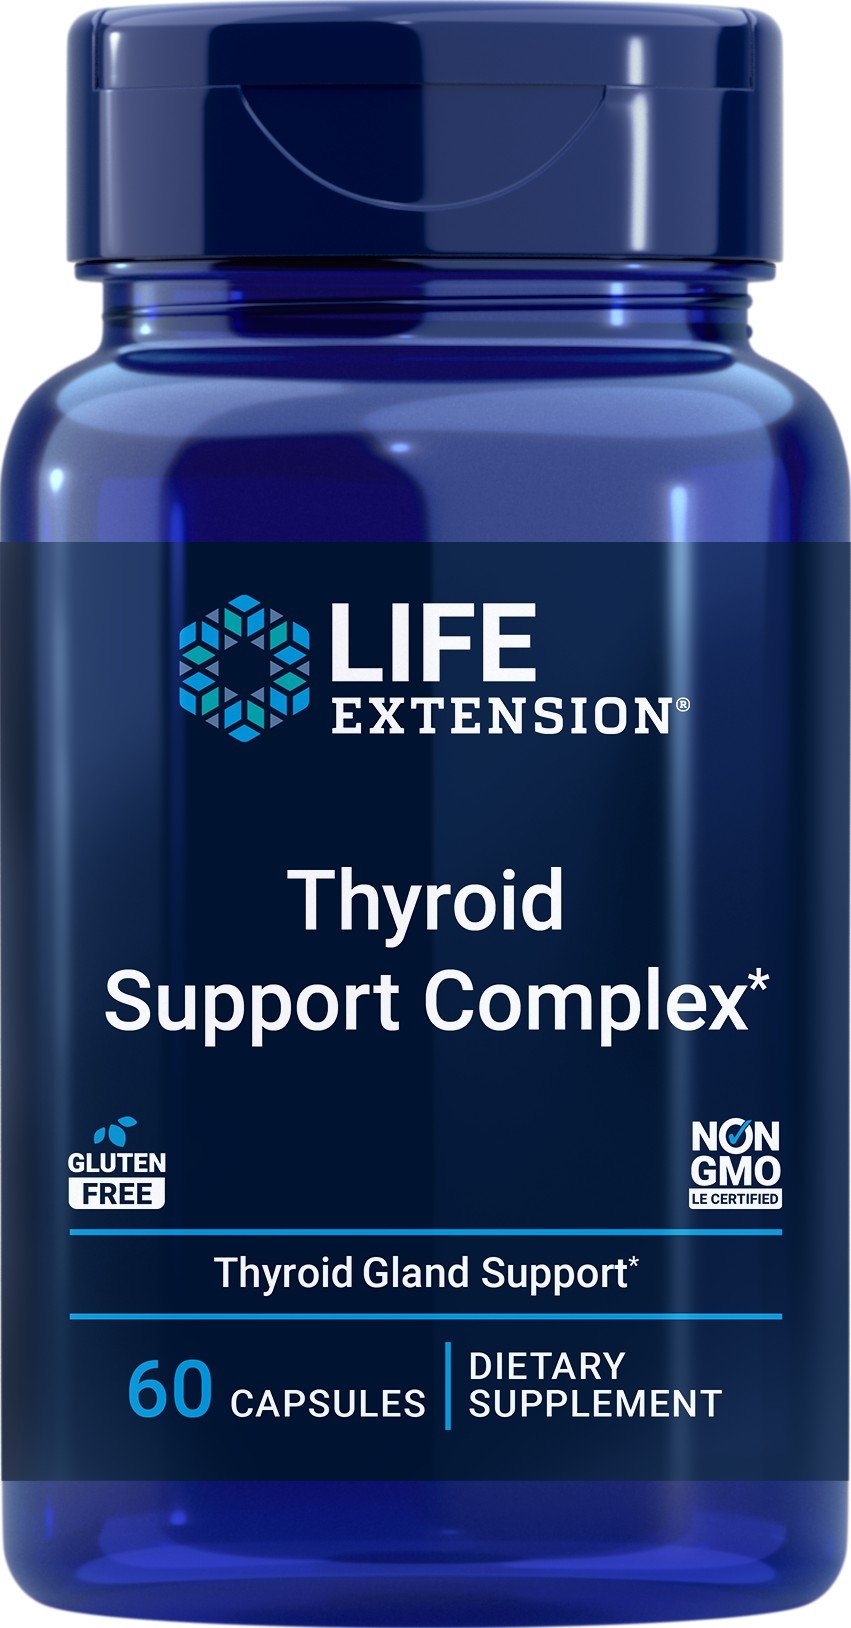 Life Extension Thyroid Support Complex 60 Capsule